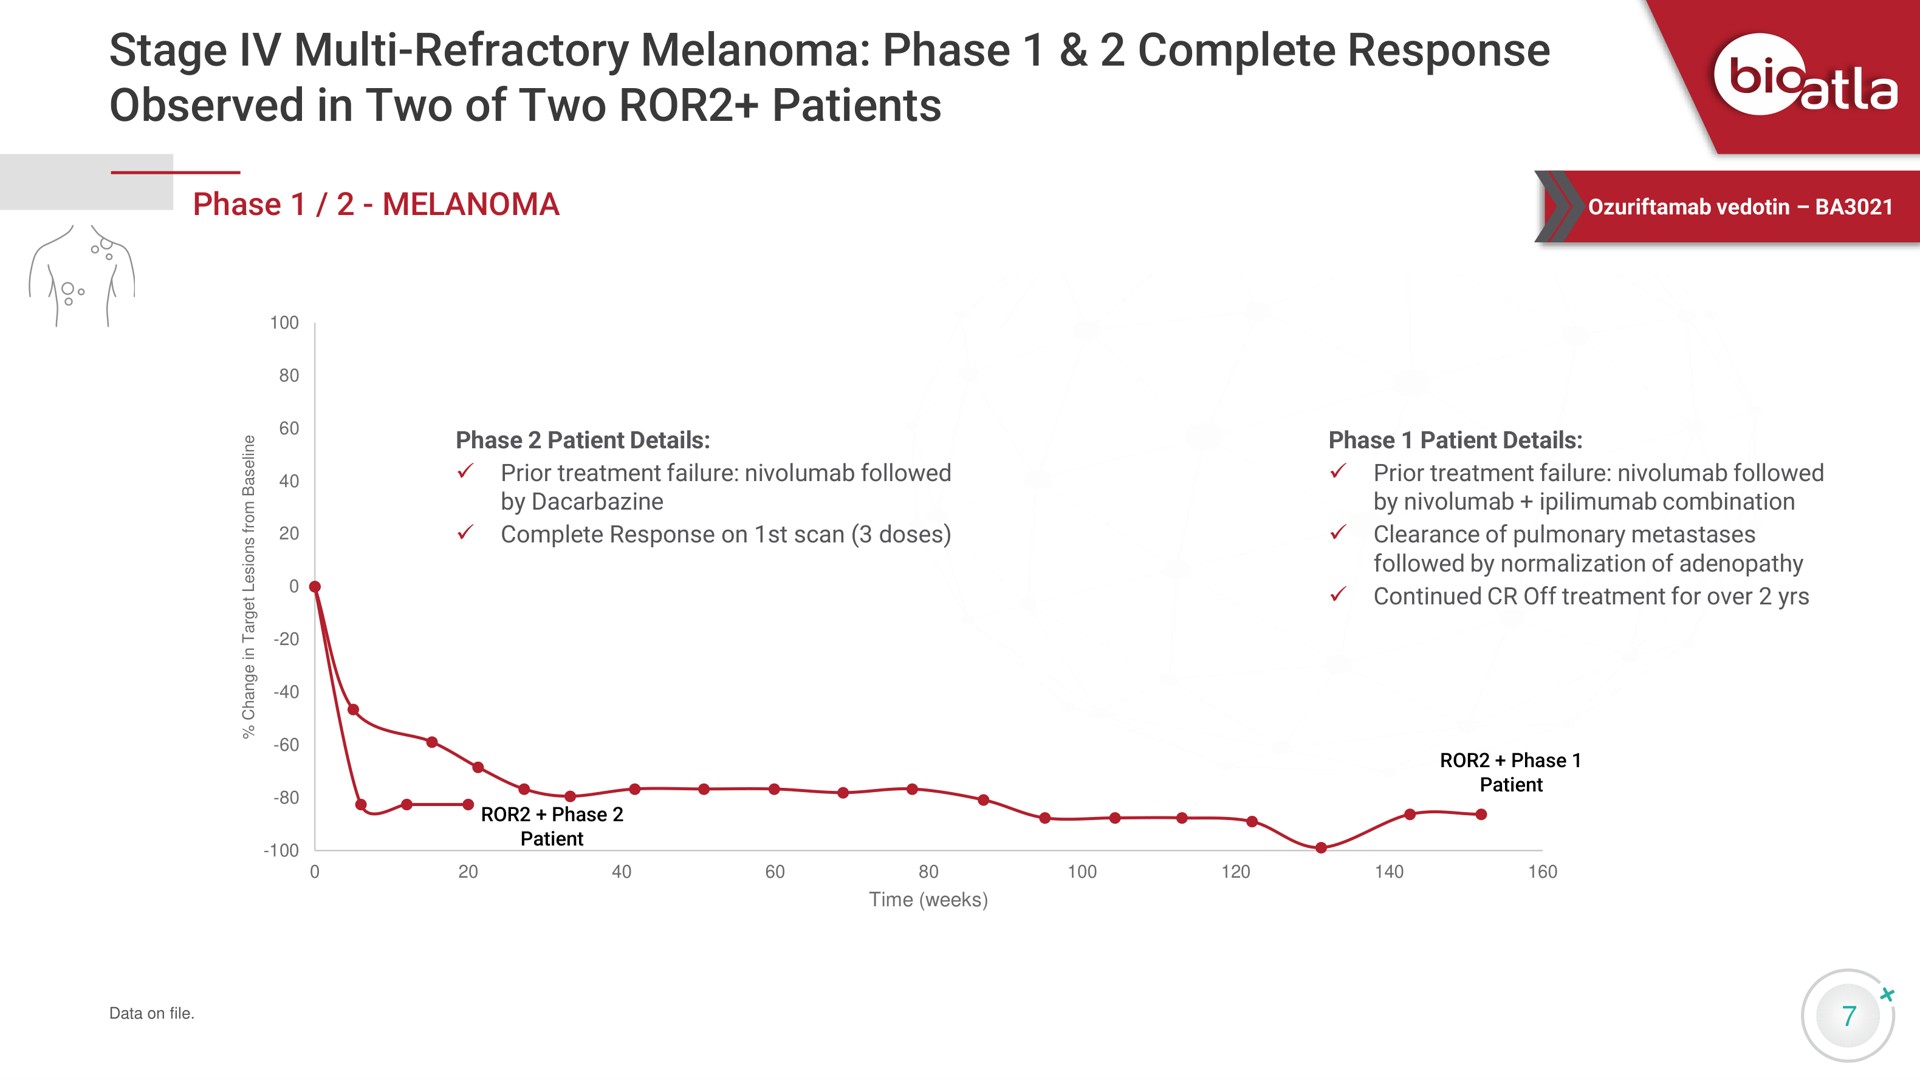 stage refractory melanoma phase complete response observed in two of two patients | BioAtla